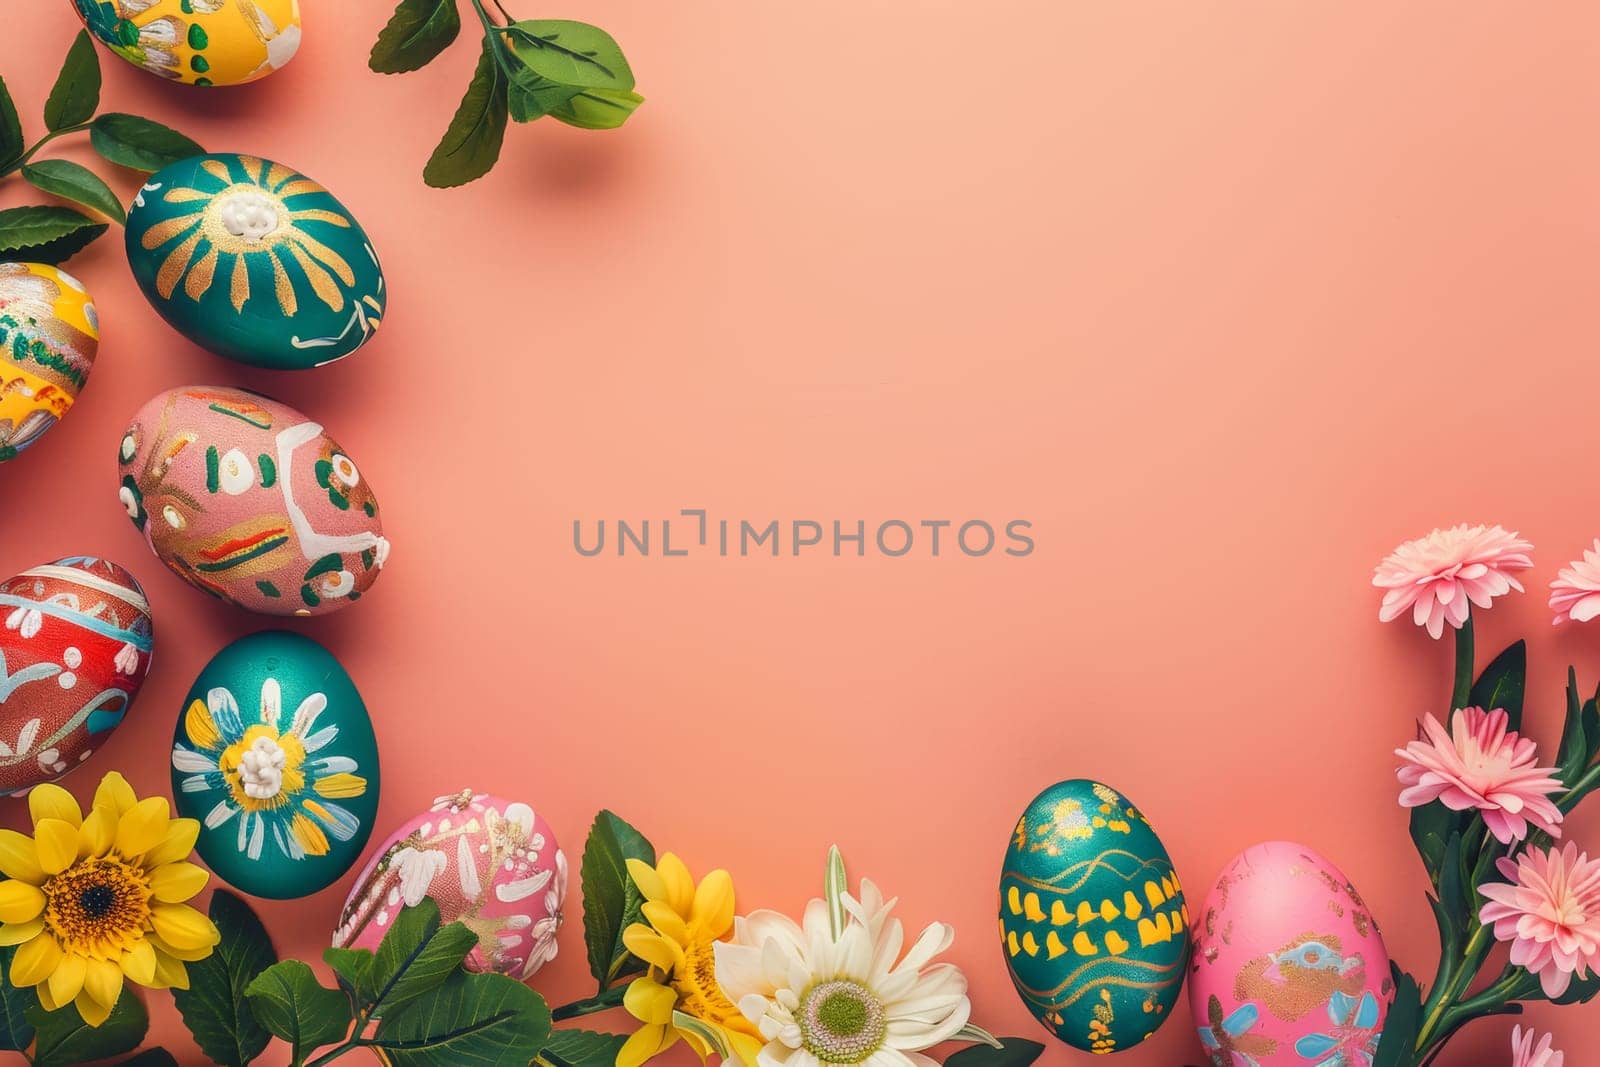 A colorful assortment of painted eggs are arranged in a circle on a pink background. The eggs are of various sizes and colors, and they are surrounded by flowers, creating a cheerful